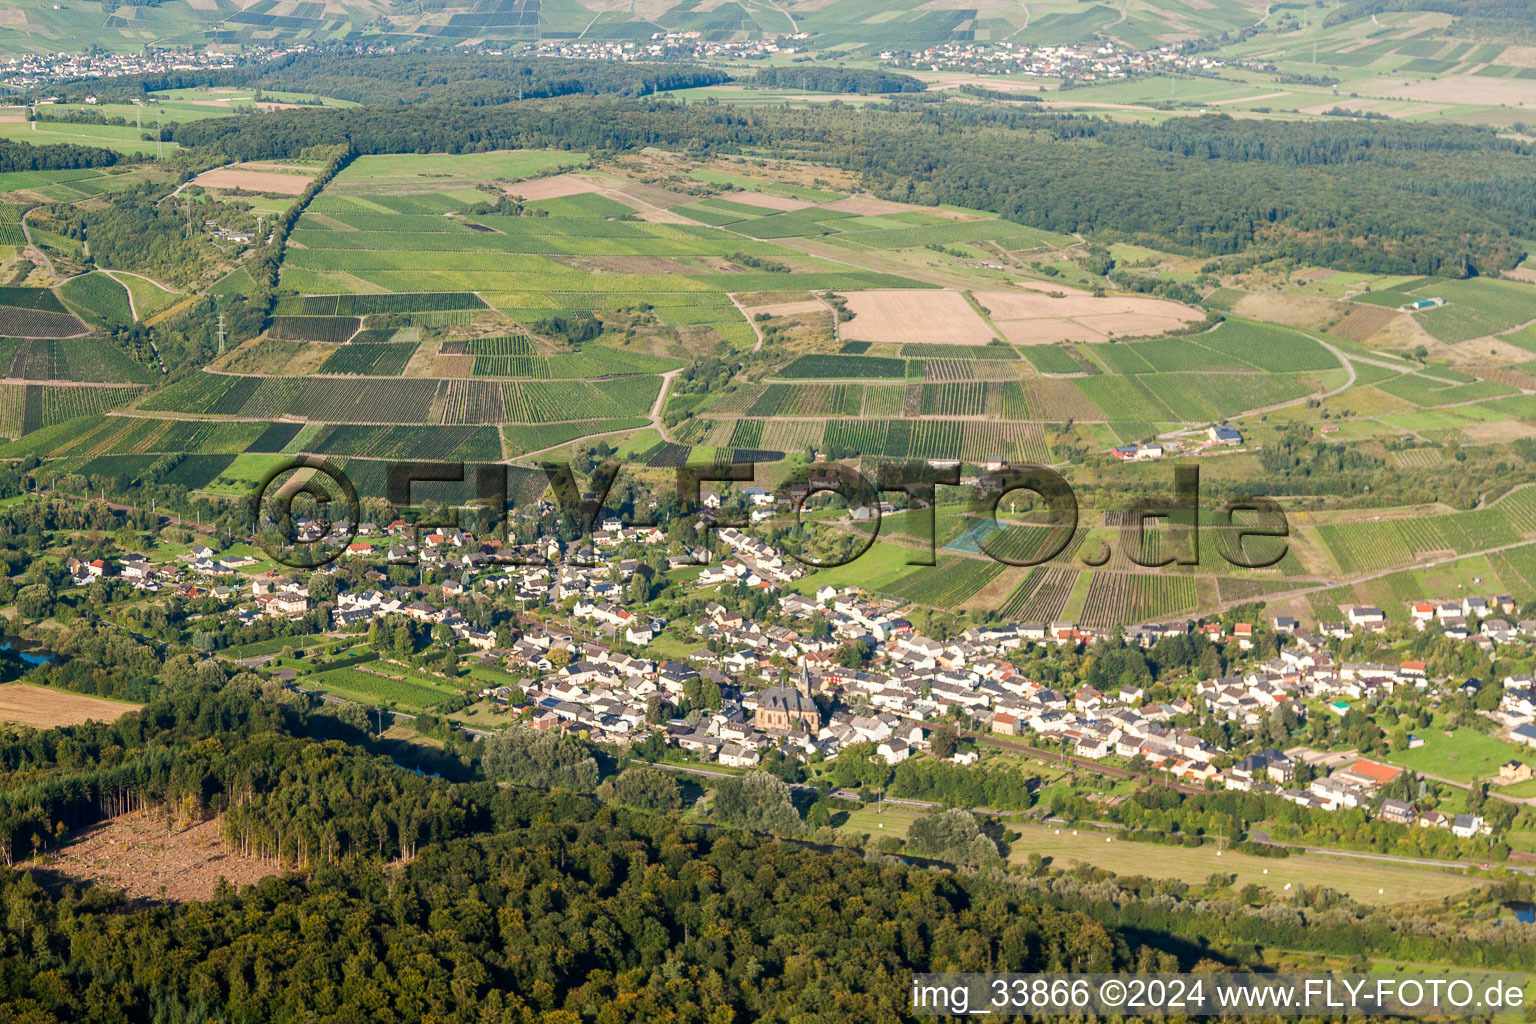 Village - view on the edge of agricultural fields and farmland in Wawern in the state Rhineland-Palatinate, Germany